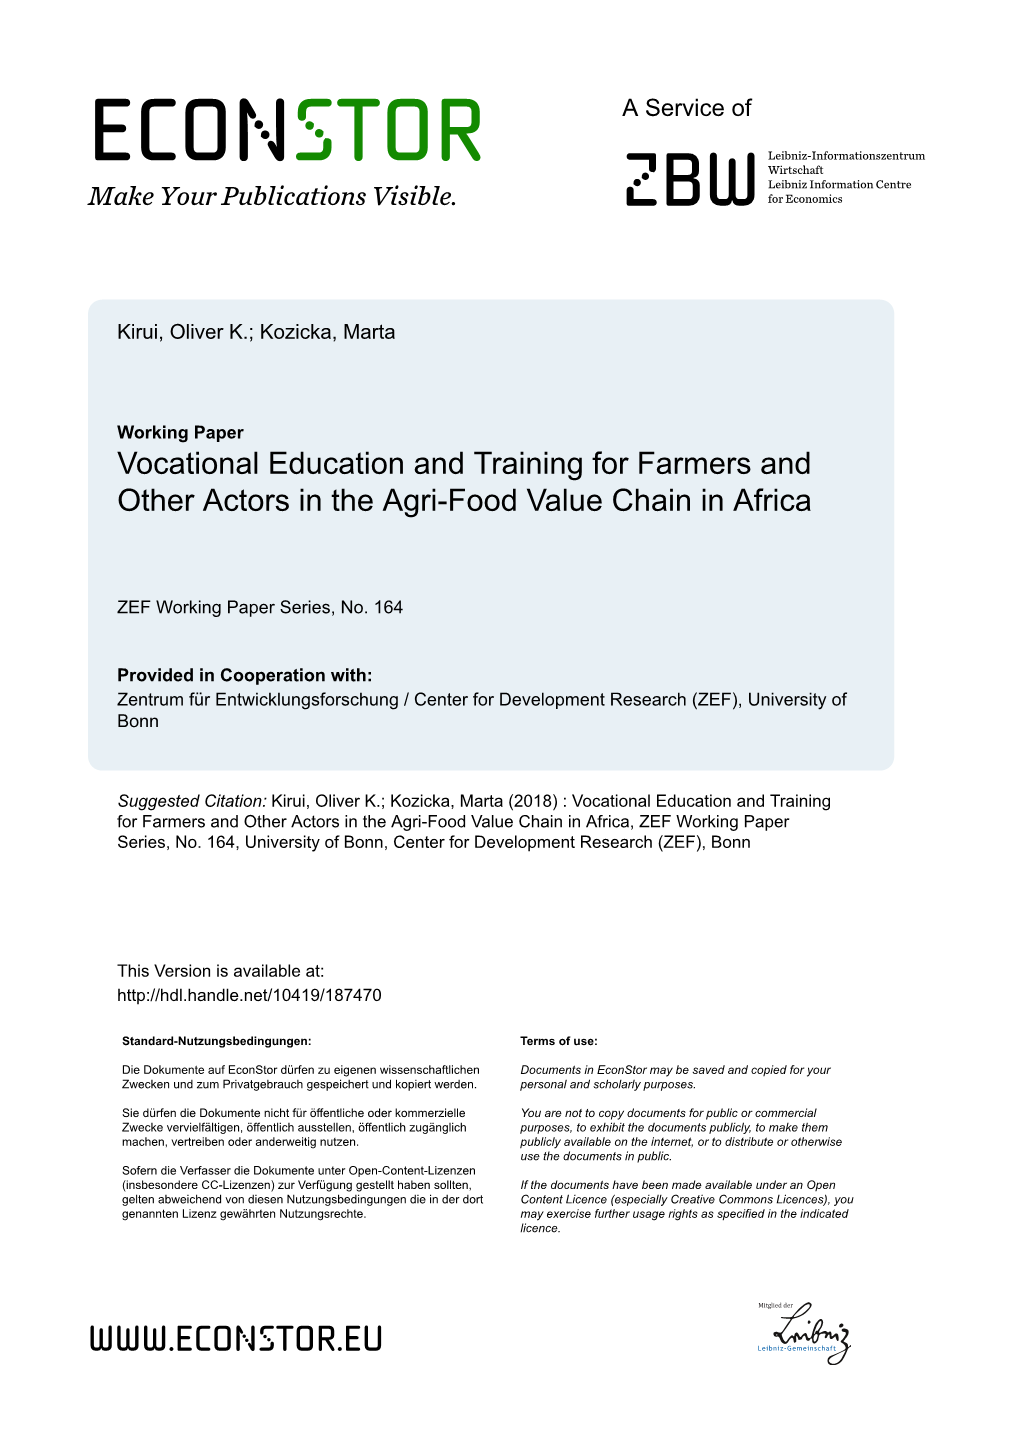 Vocational Education and Training for Farmers and Other Actors in the Agri-Food Value Chain in Africa